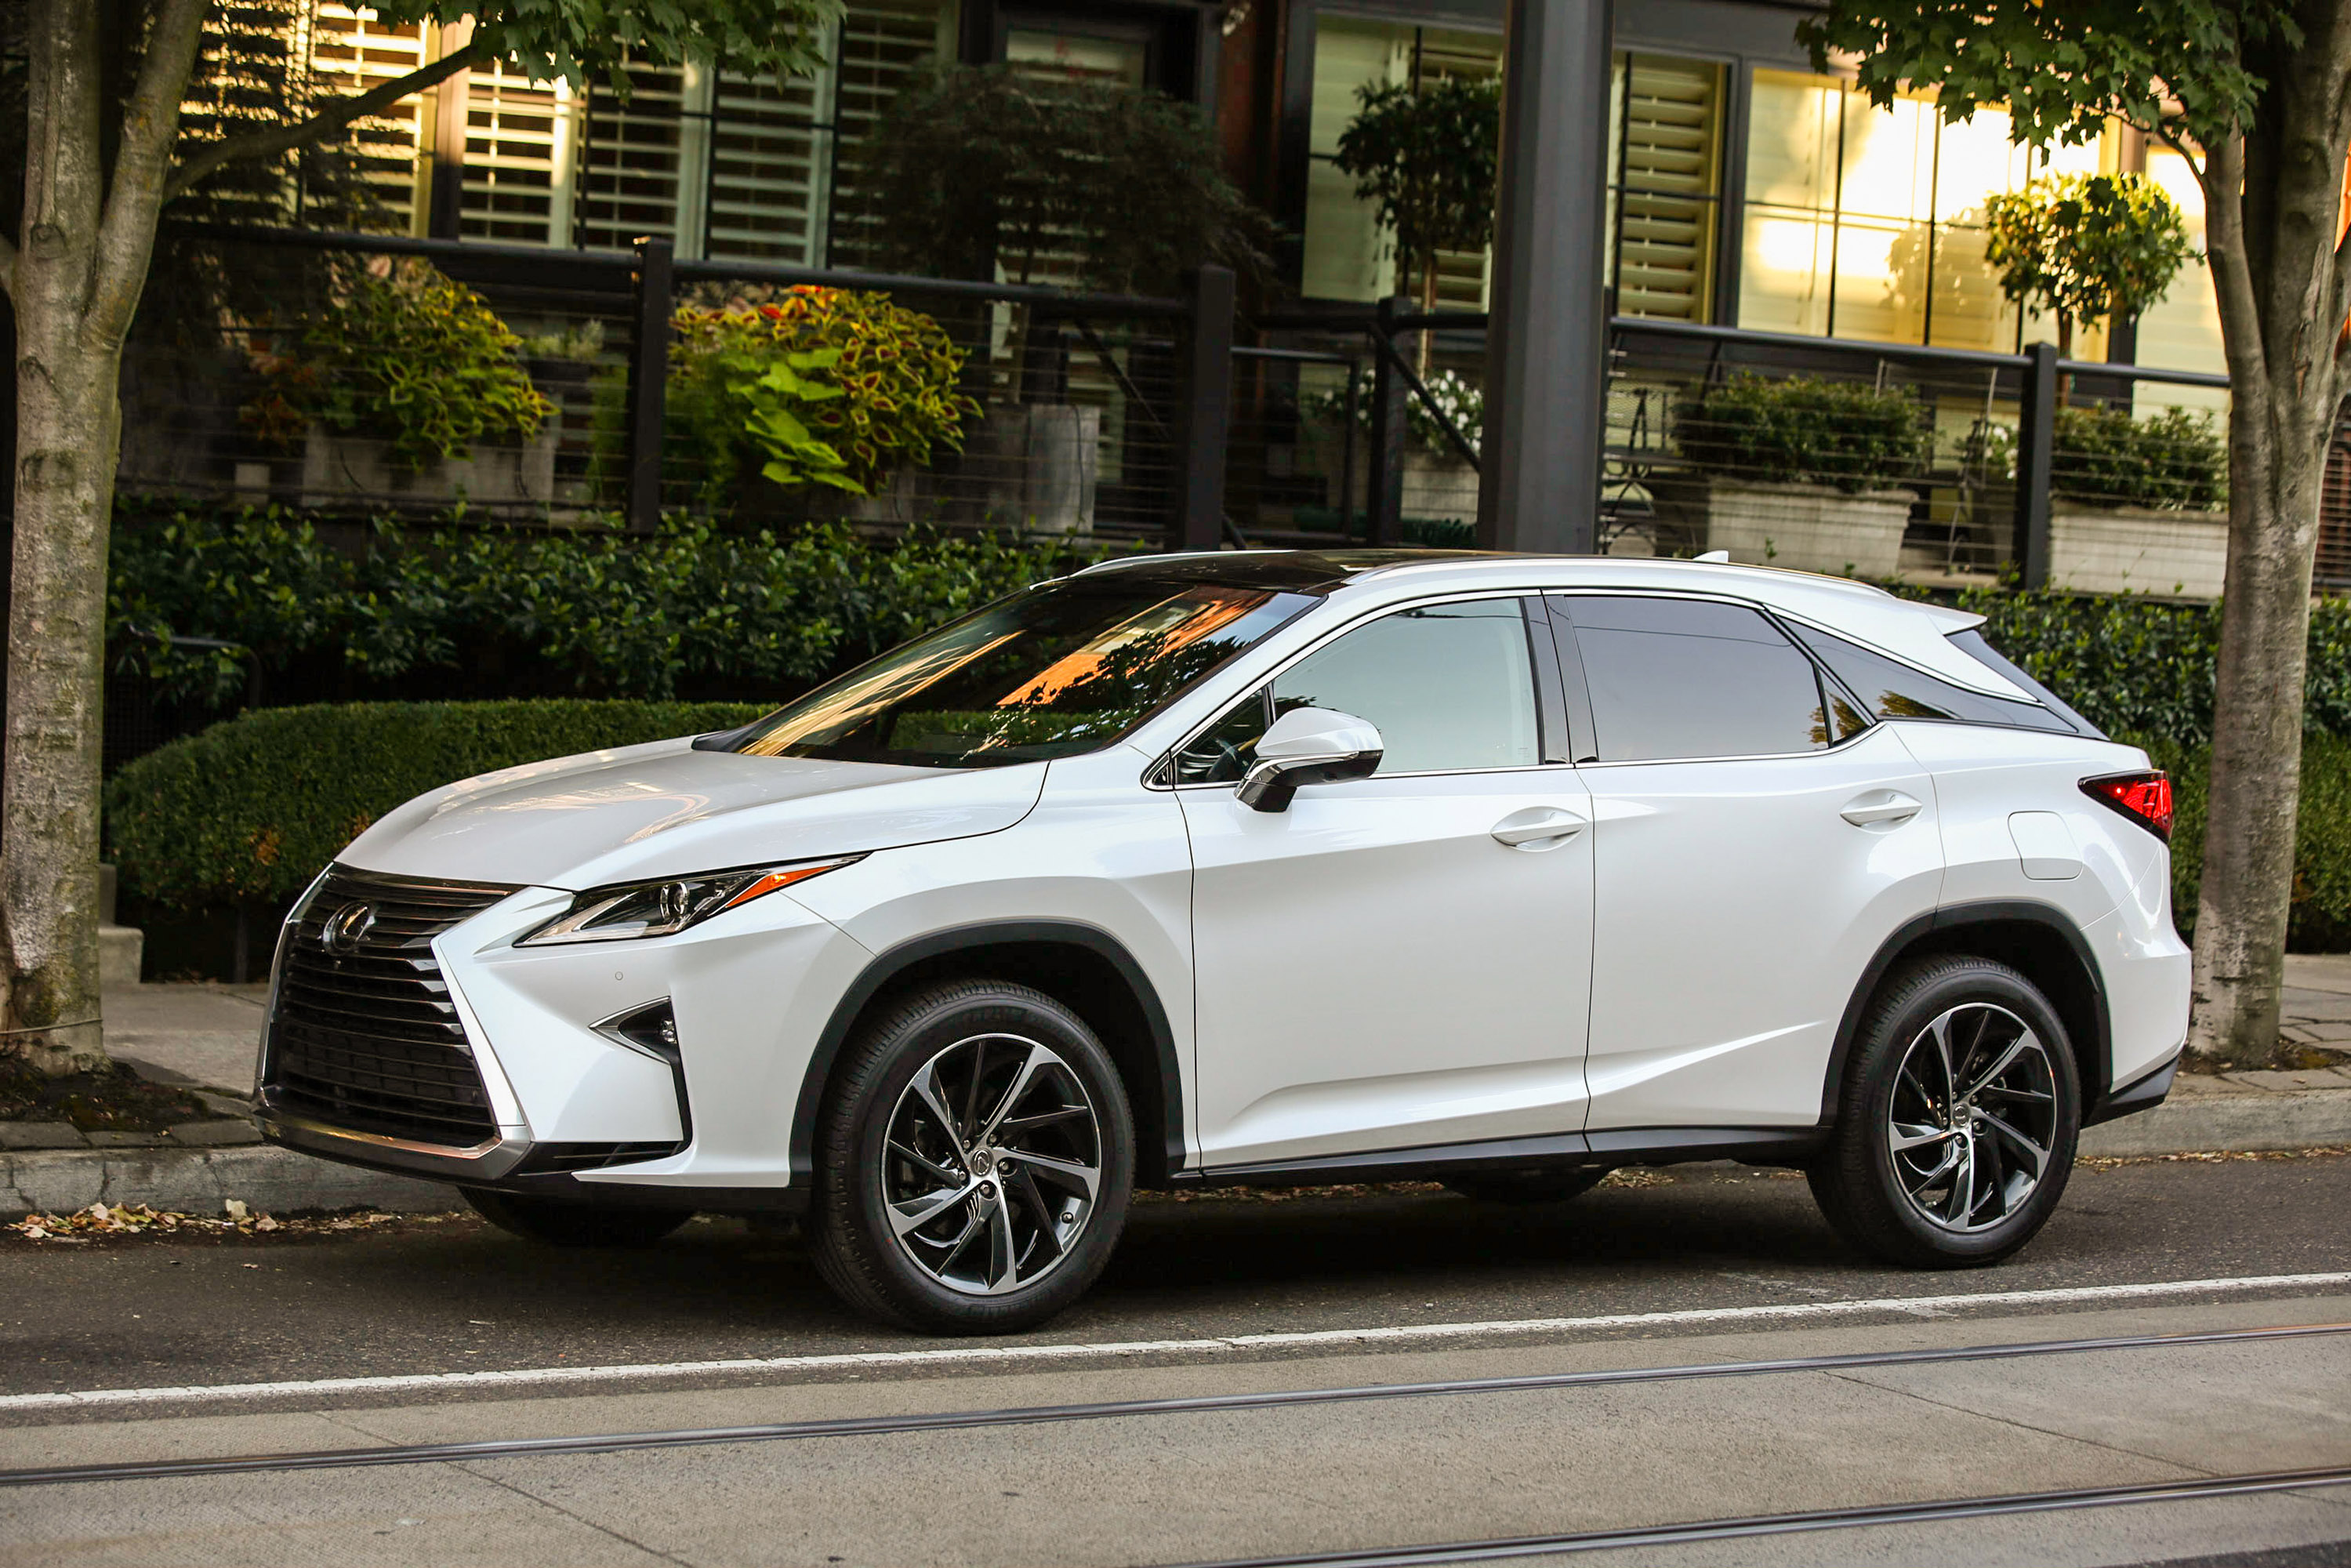 2016 Lexus RX Hybrid offers flexibility, functionality and